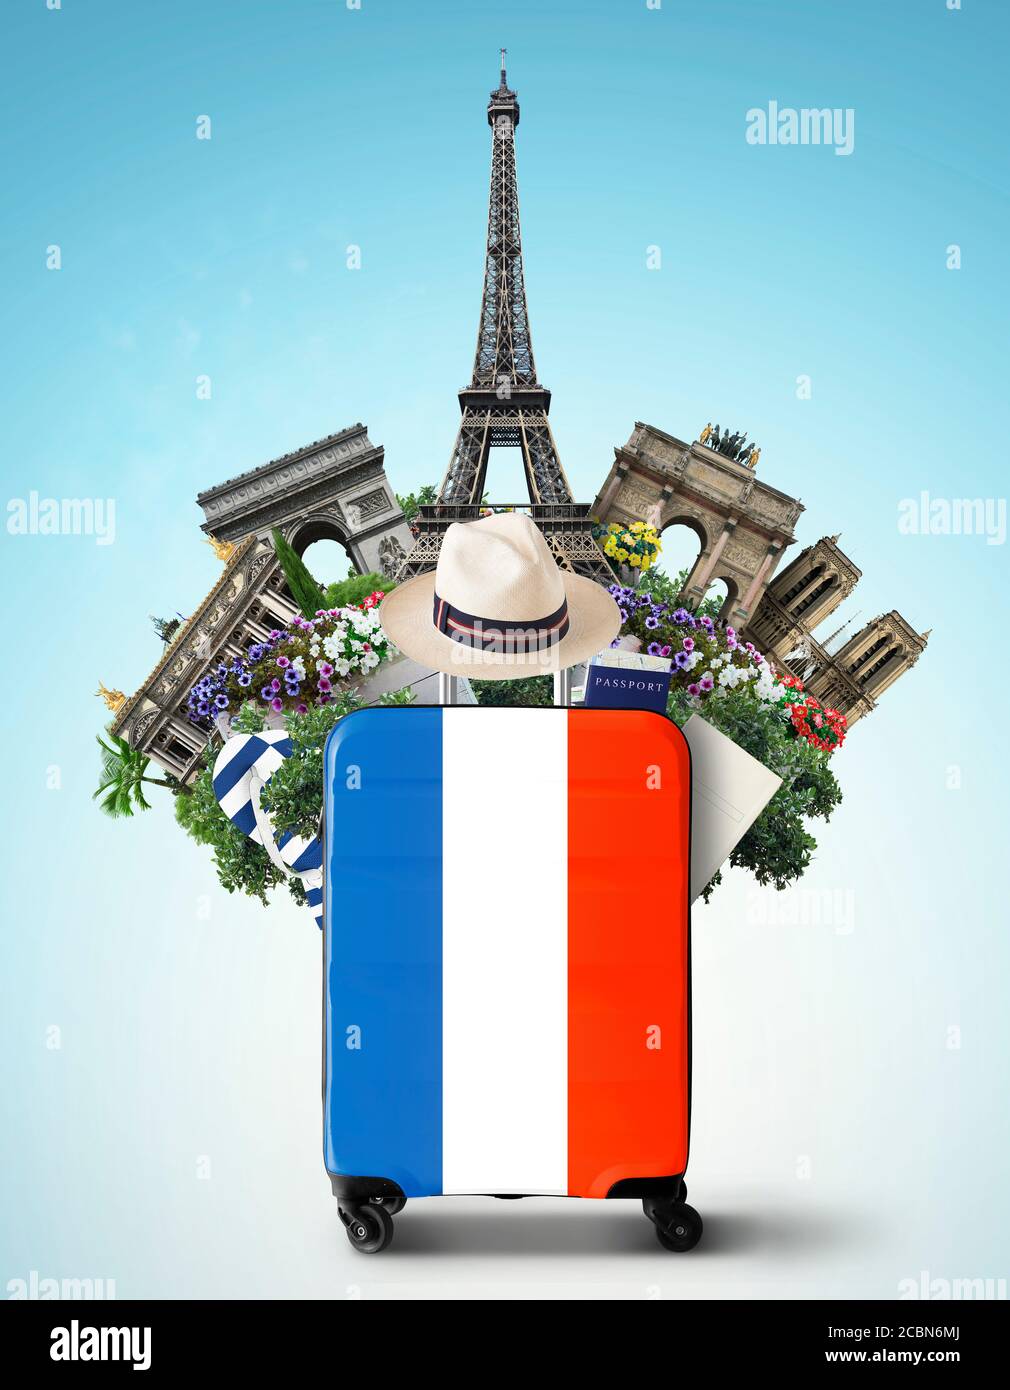 France, modern suitcase with French flag and landmarks Stock Photo - Alamy